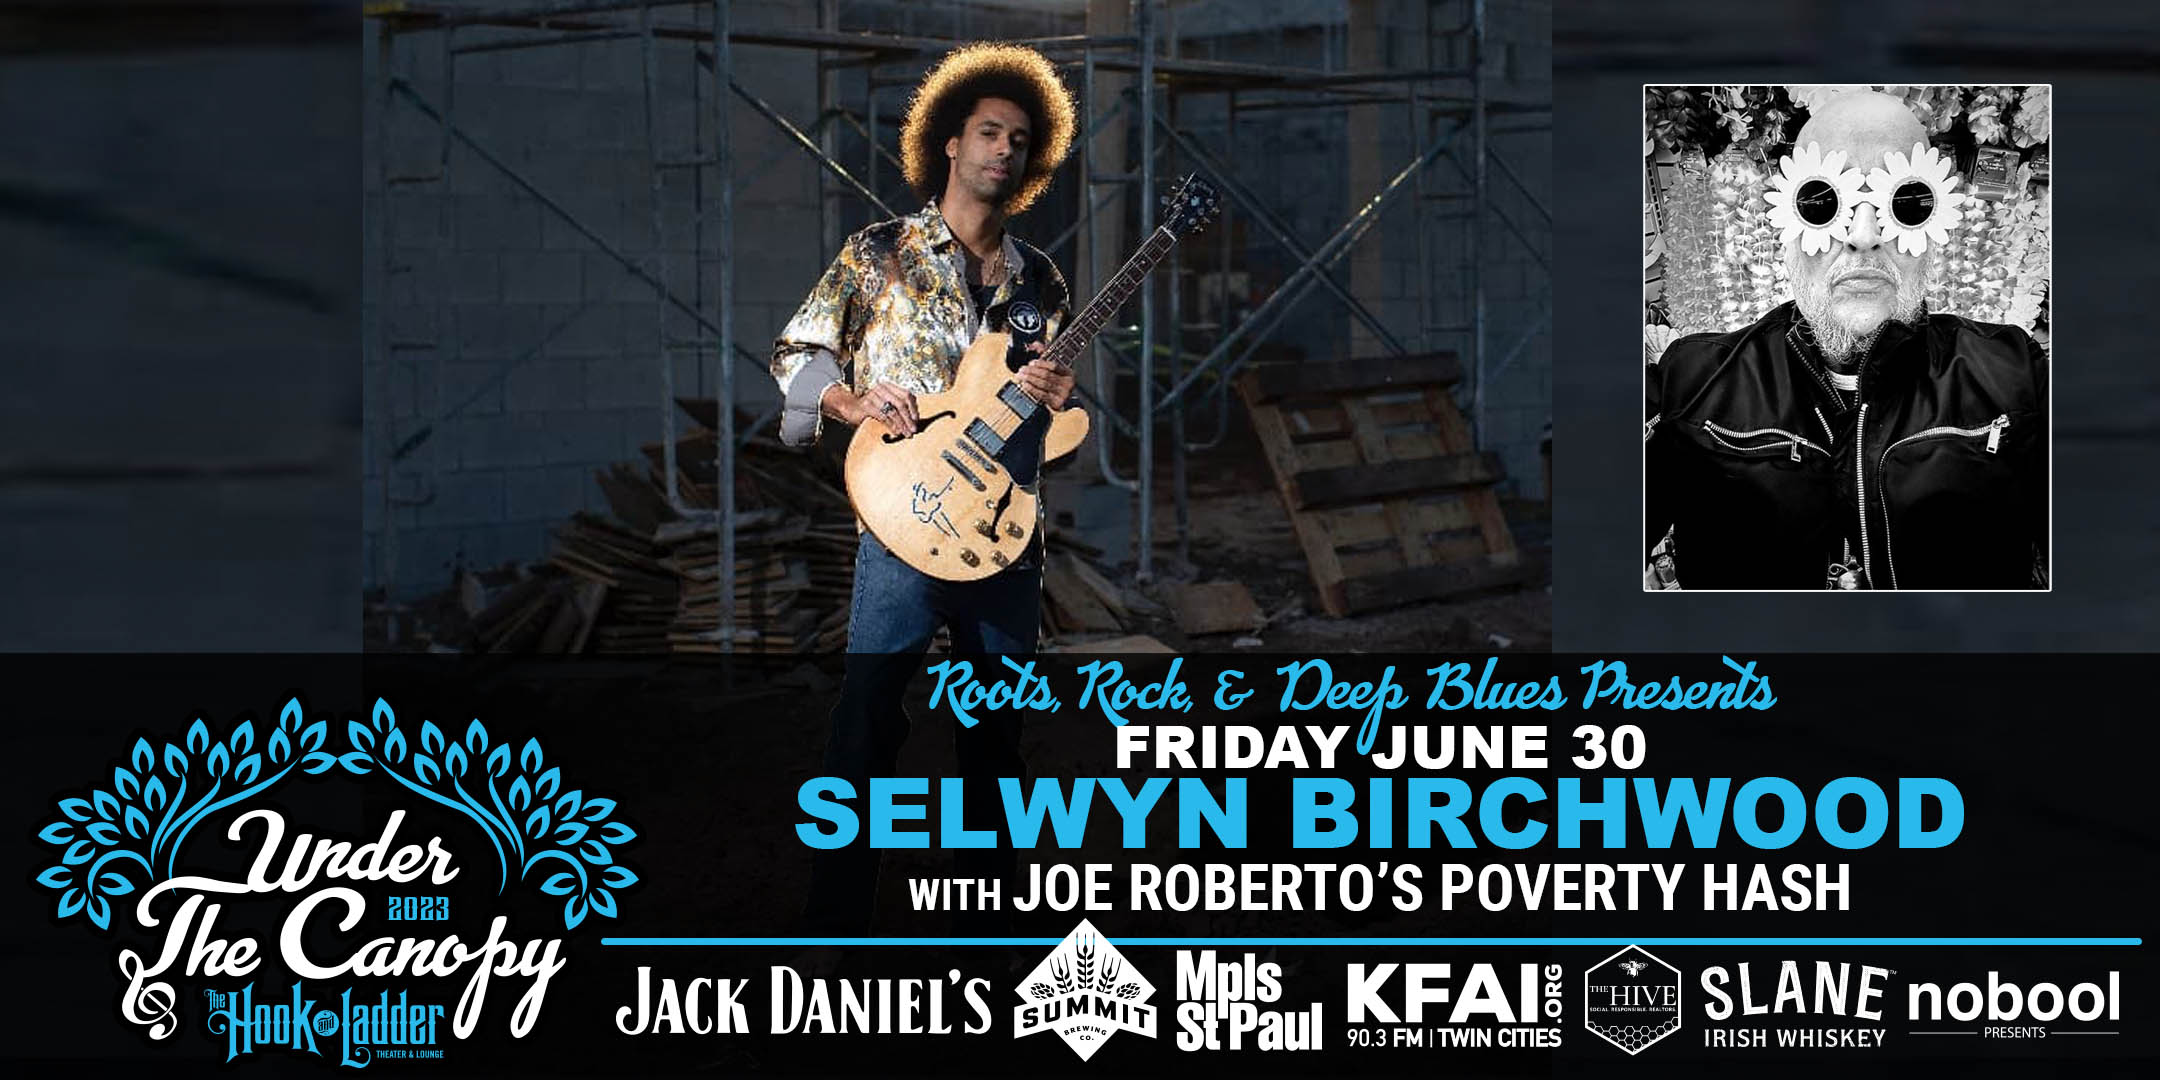 Selwyn Birchwood with Joe Roberto's Poverty Hash Friday, June 30, 2023 Under The Canopy at The Hook and Ladder Theater